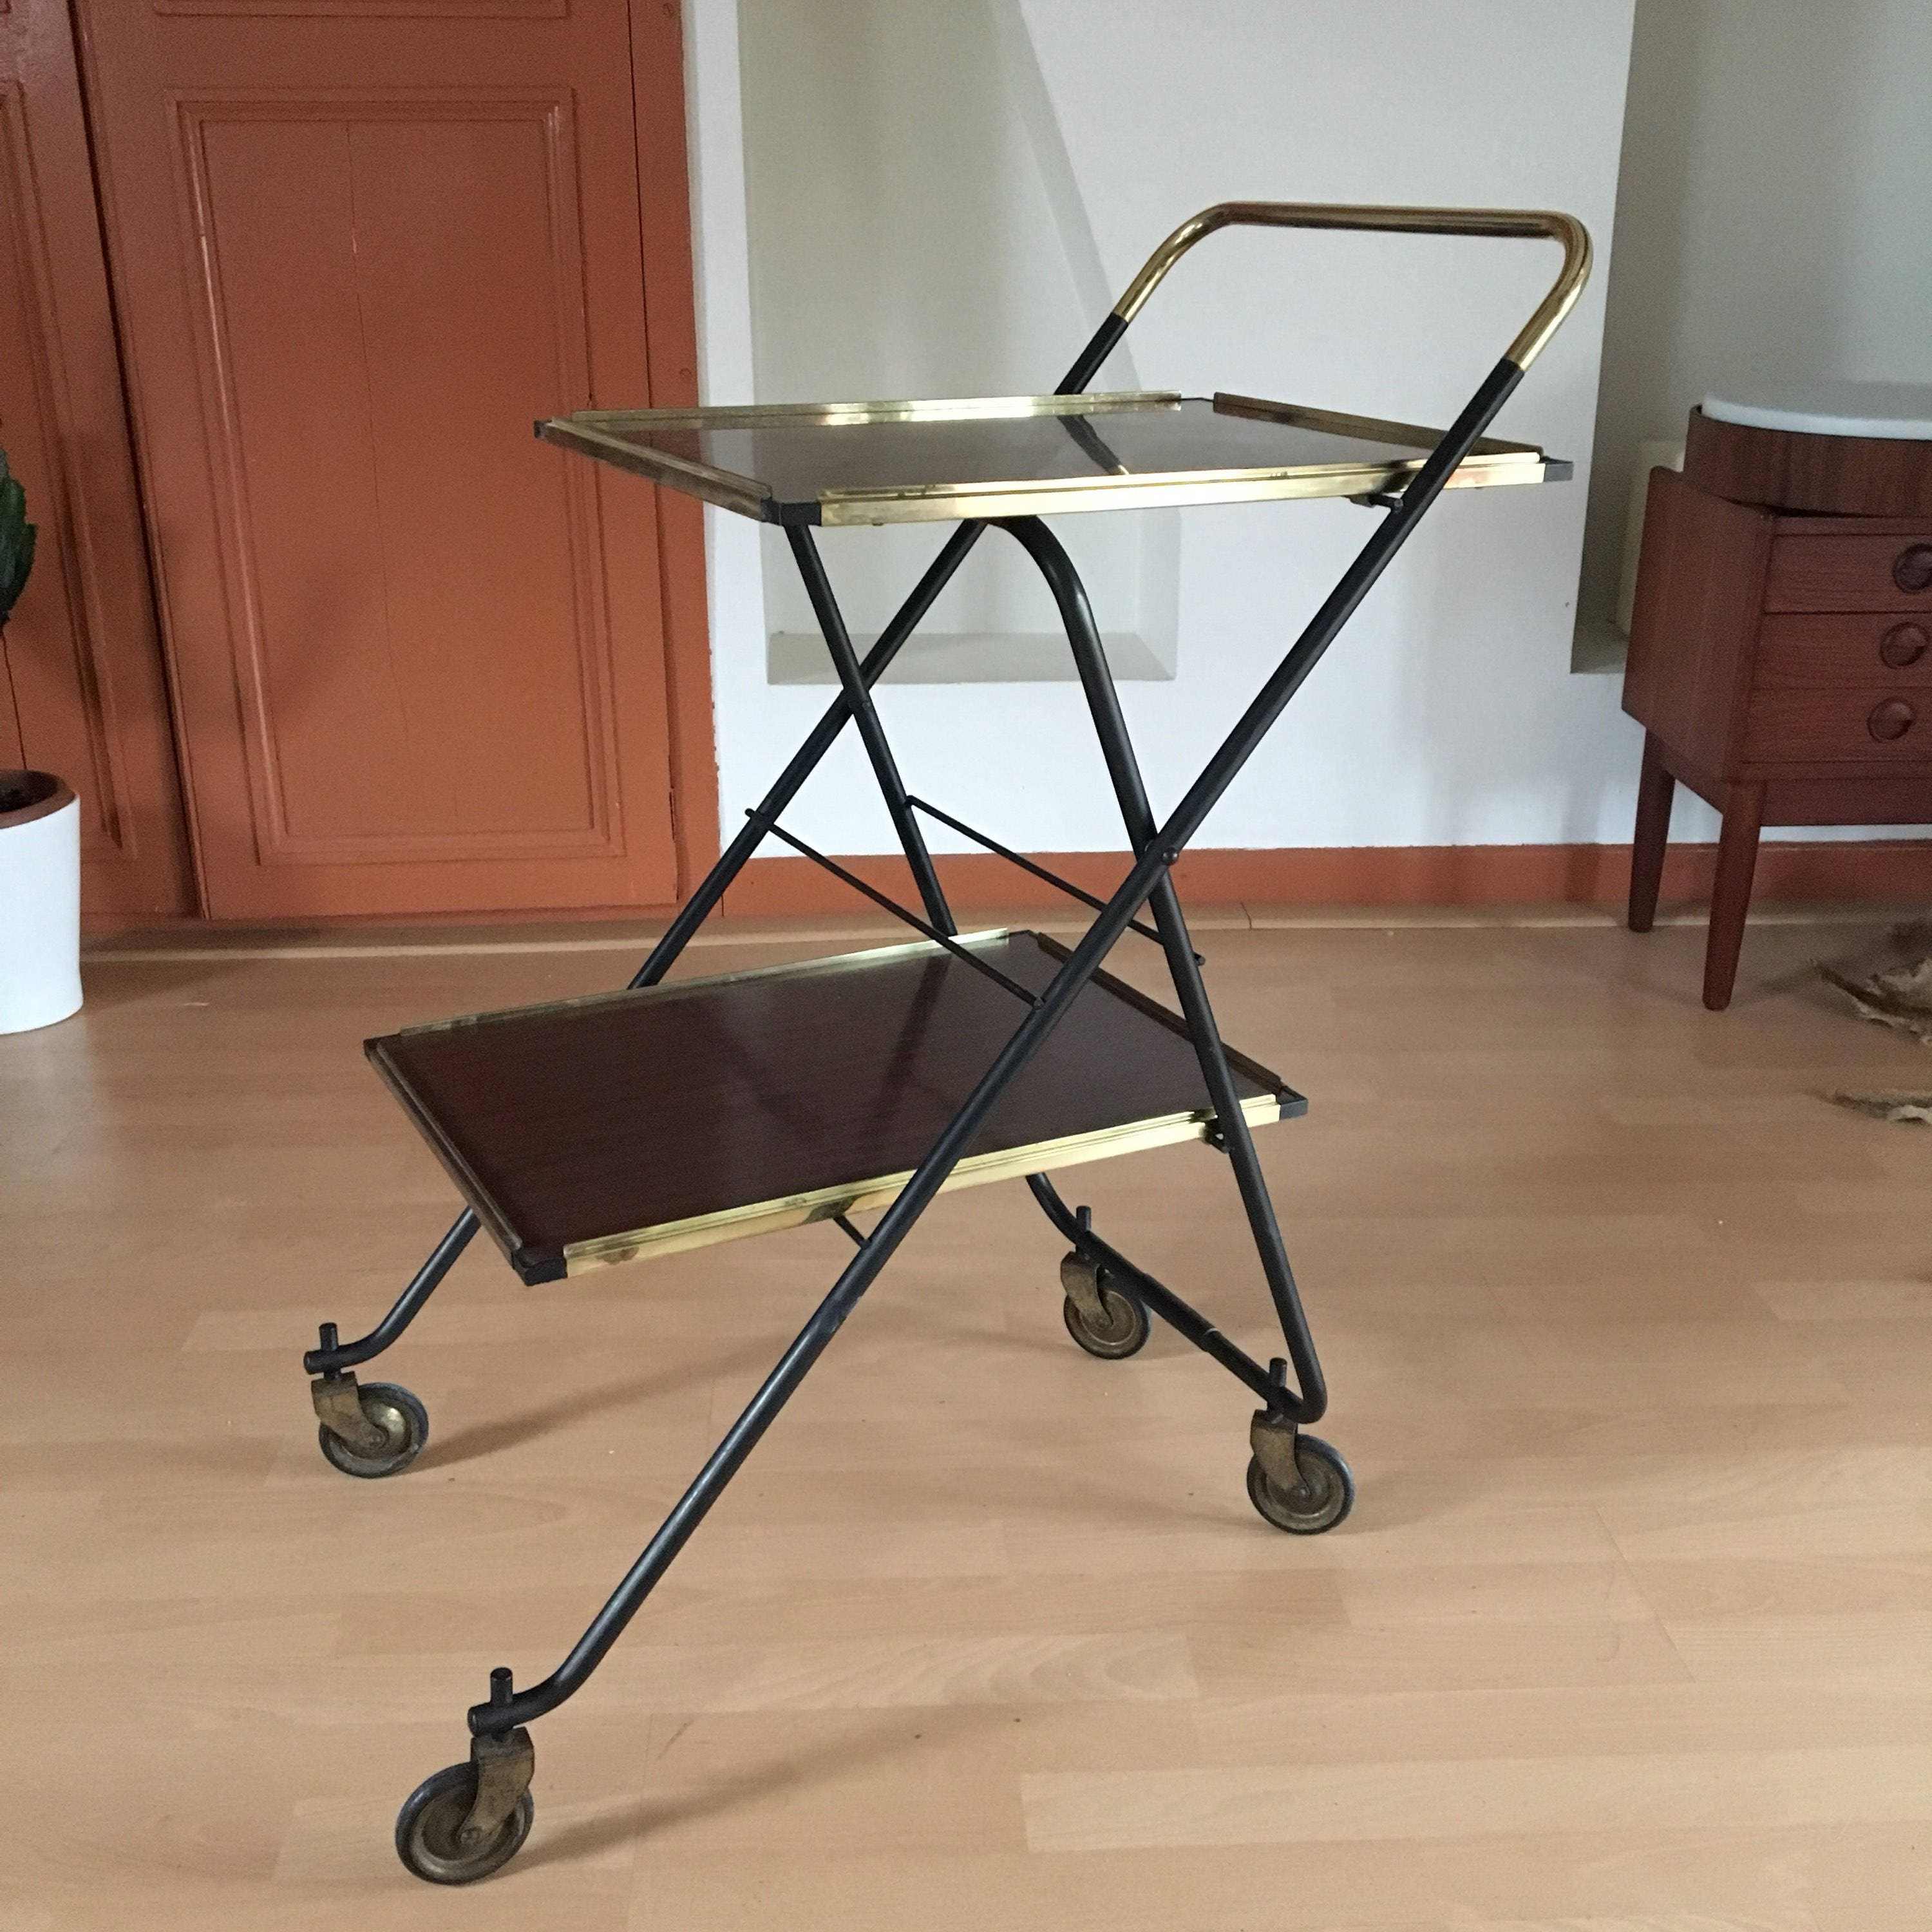 Table d'appoint Vintage - Desserte Table Roulante Table Pliante Side Or Trolley Table